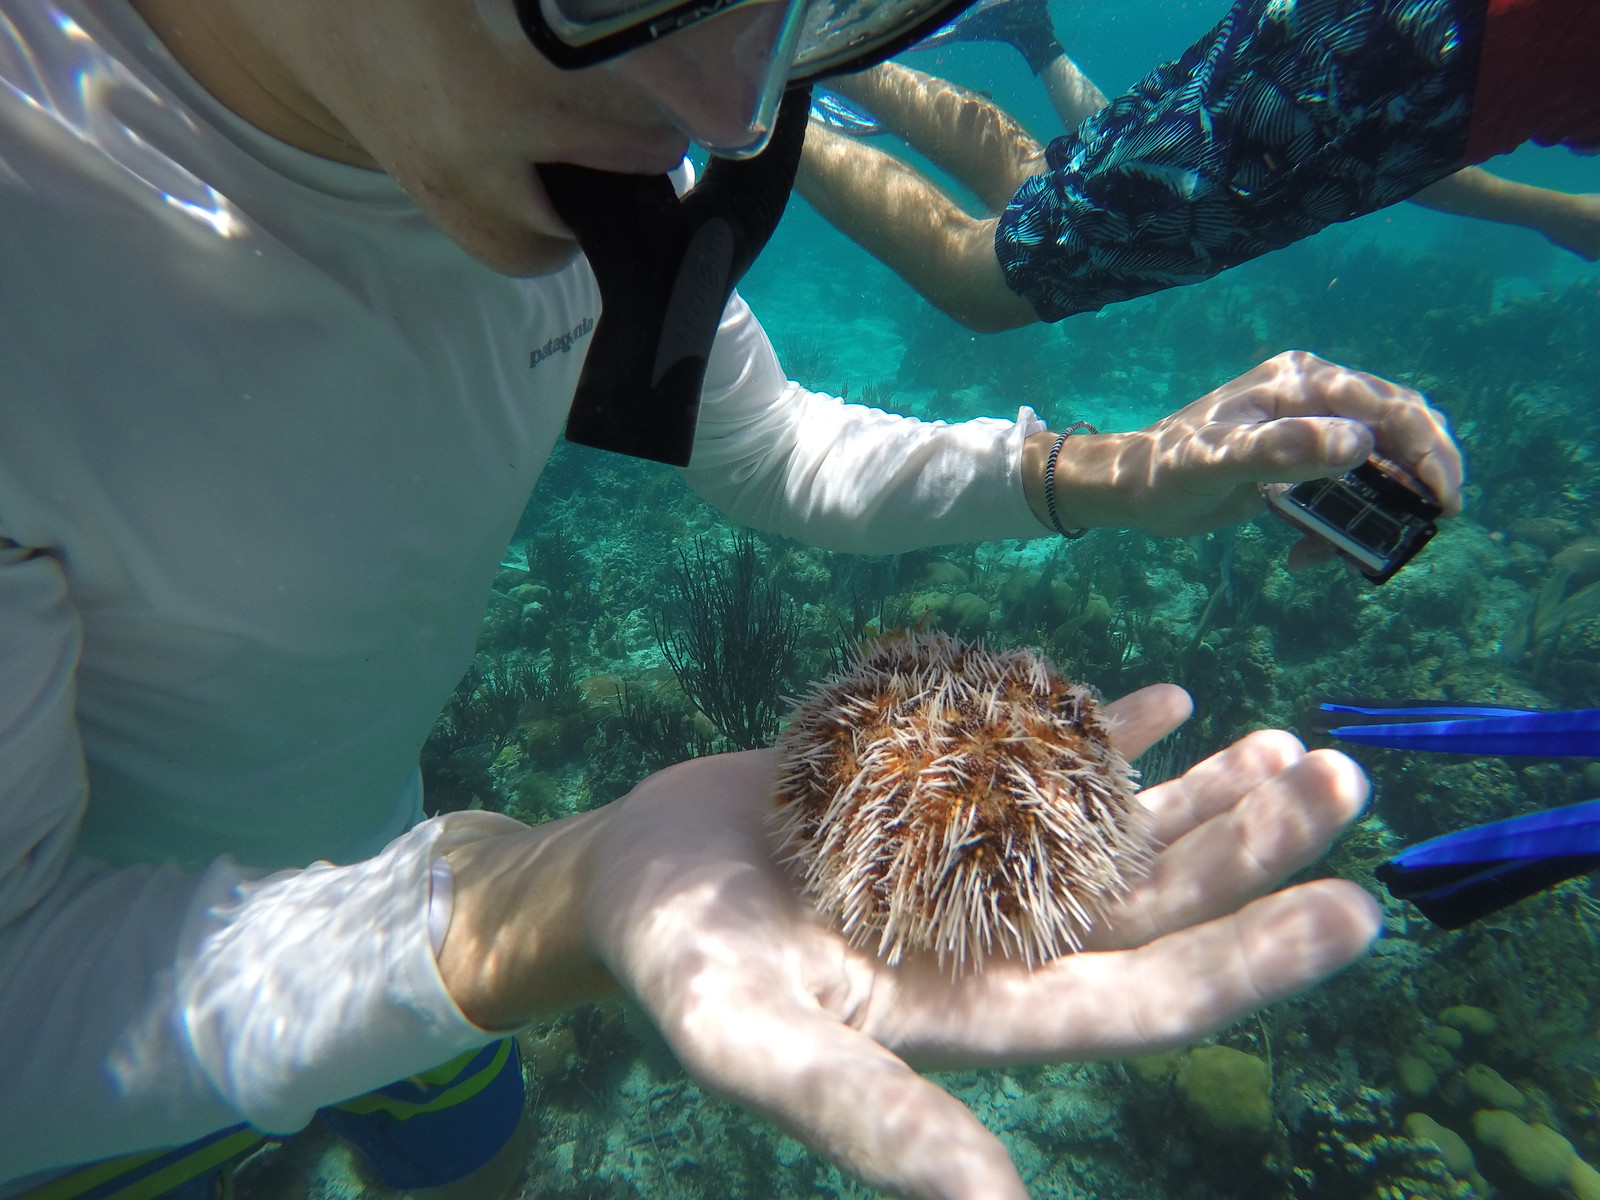 A camper holds a sea urchin while snorkeling in Belize.